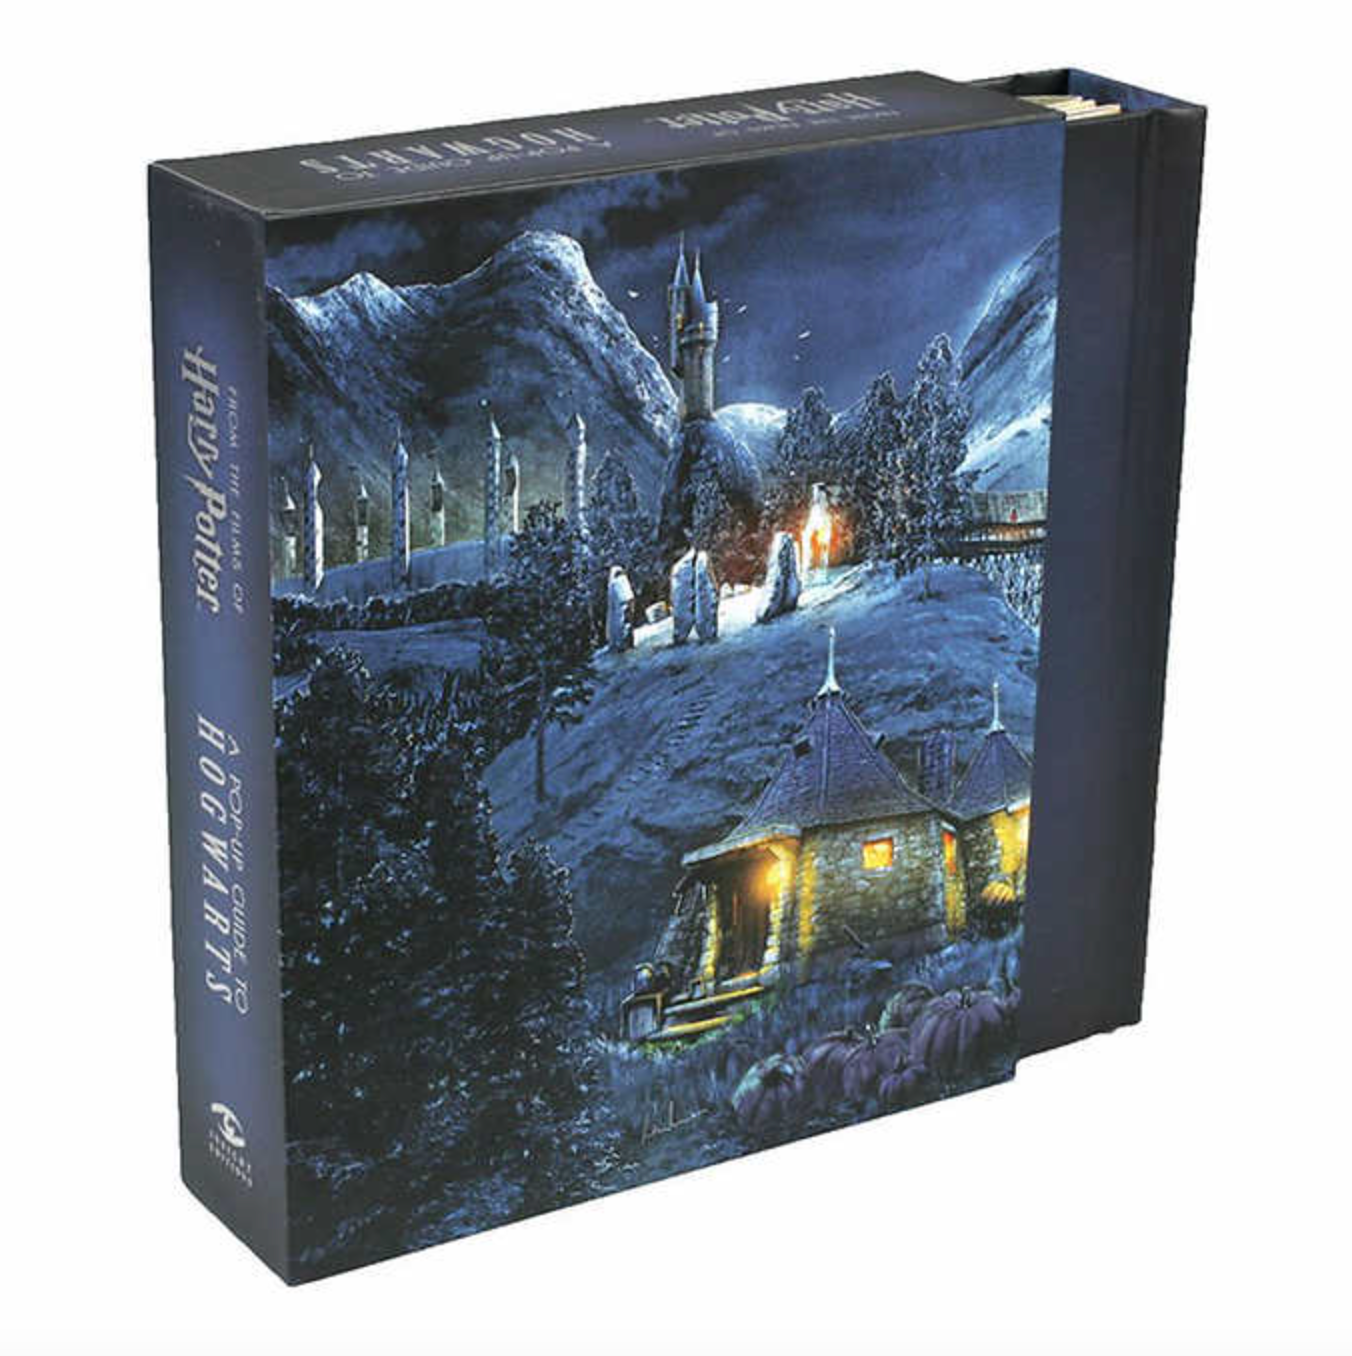 Harry Potter: A Pop-Up Guide to Hogwarts Limited Edition